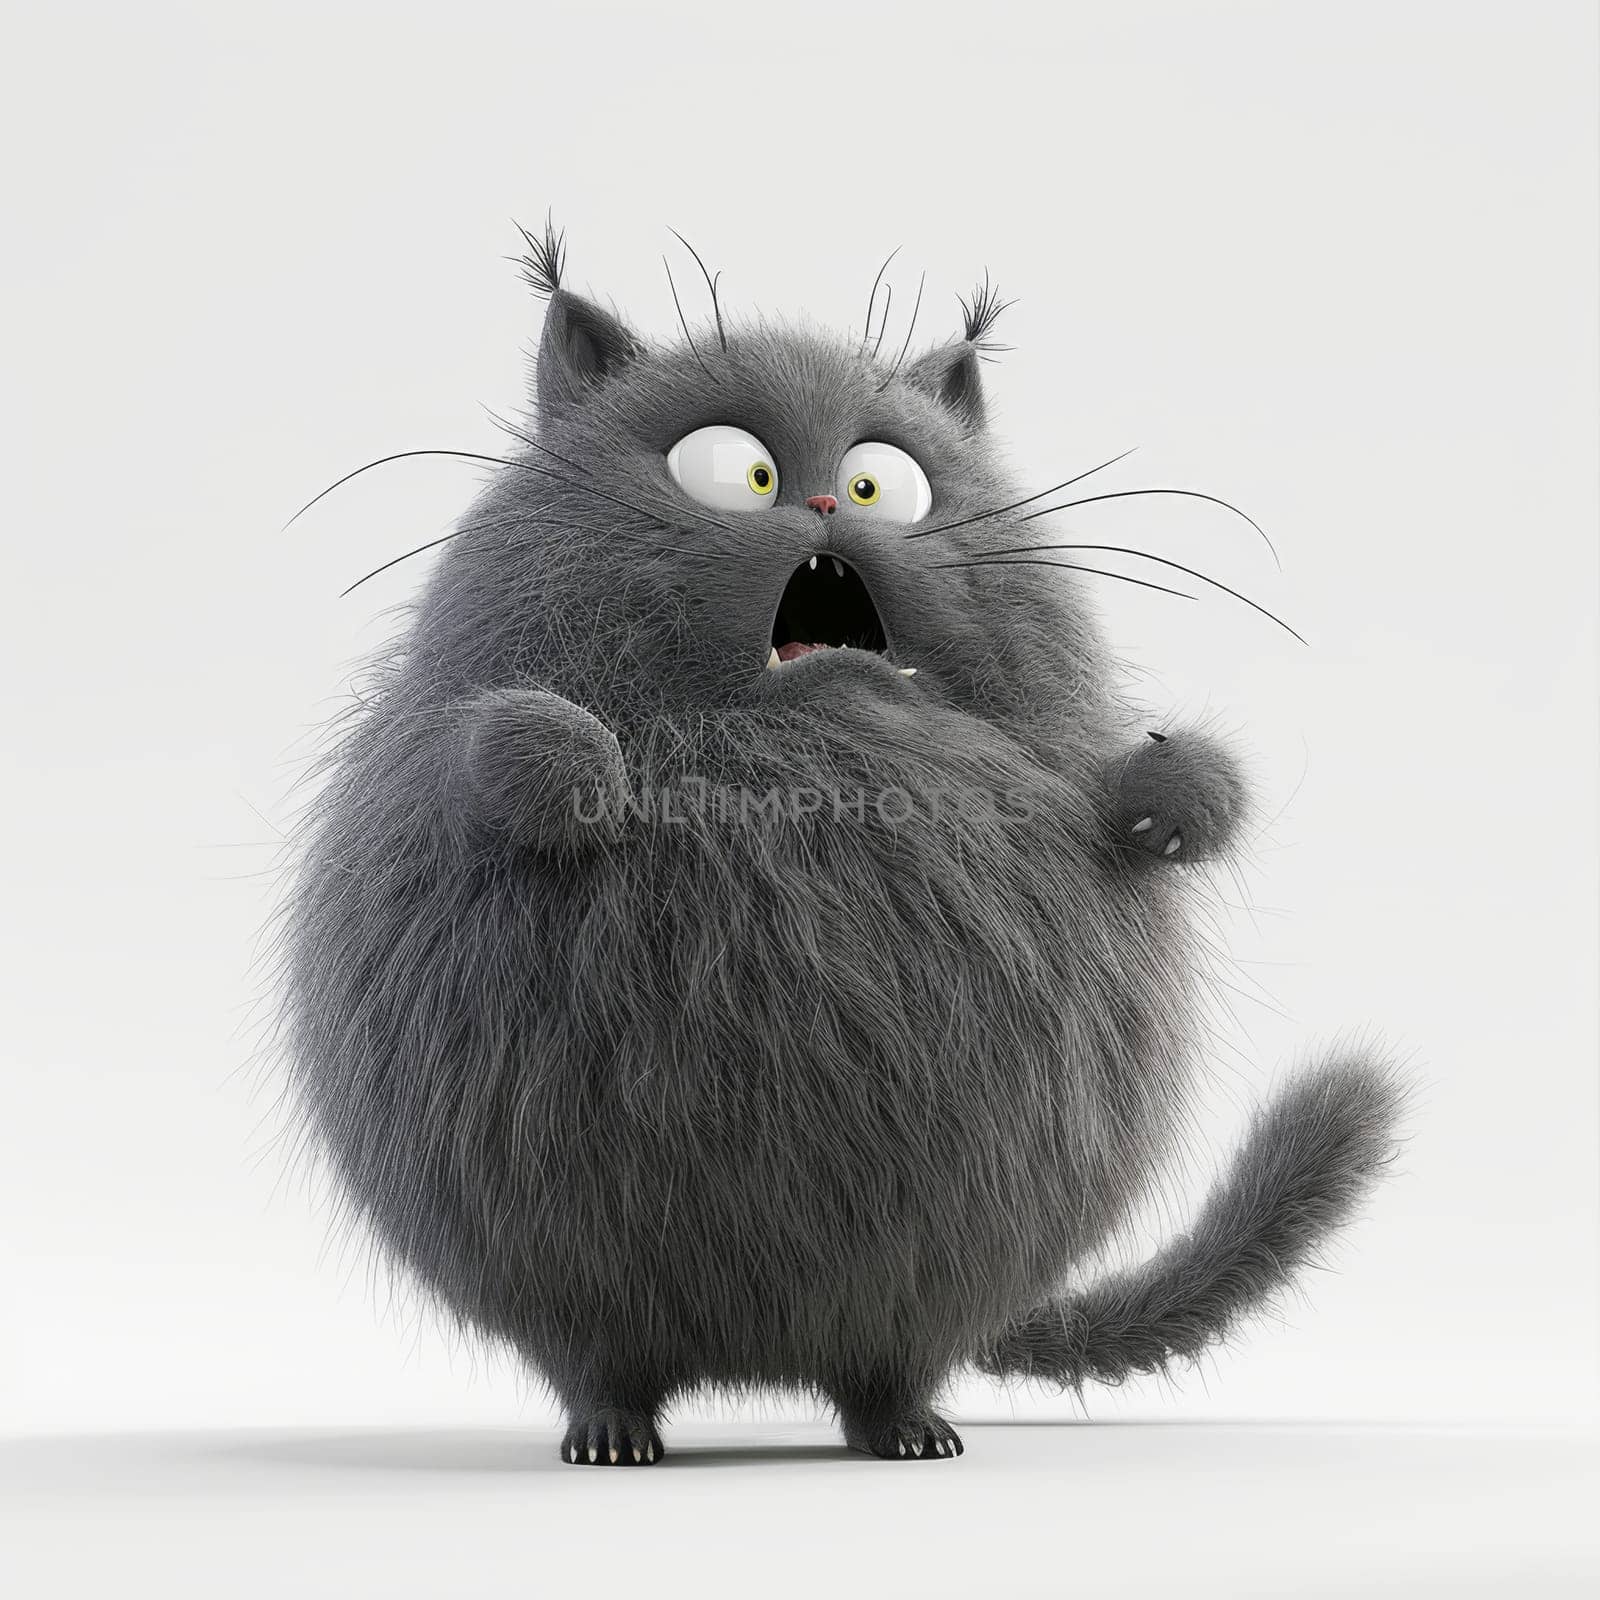 the character of a fat cute fluffy grey cat on a white background. 3d illustration by Lobachad